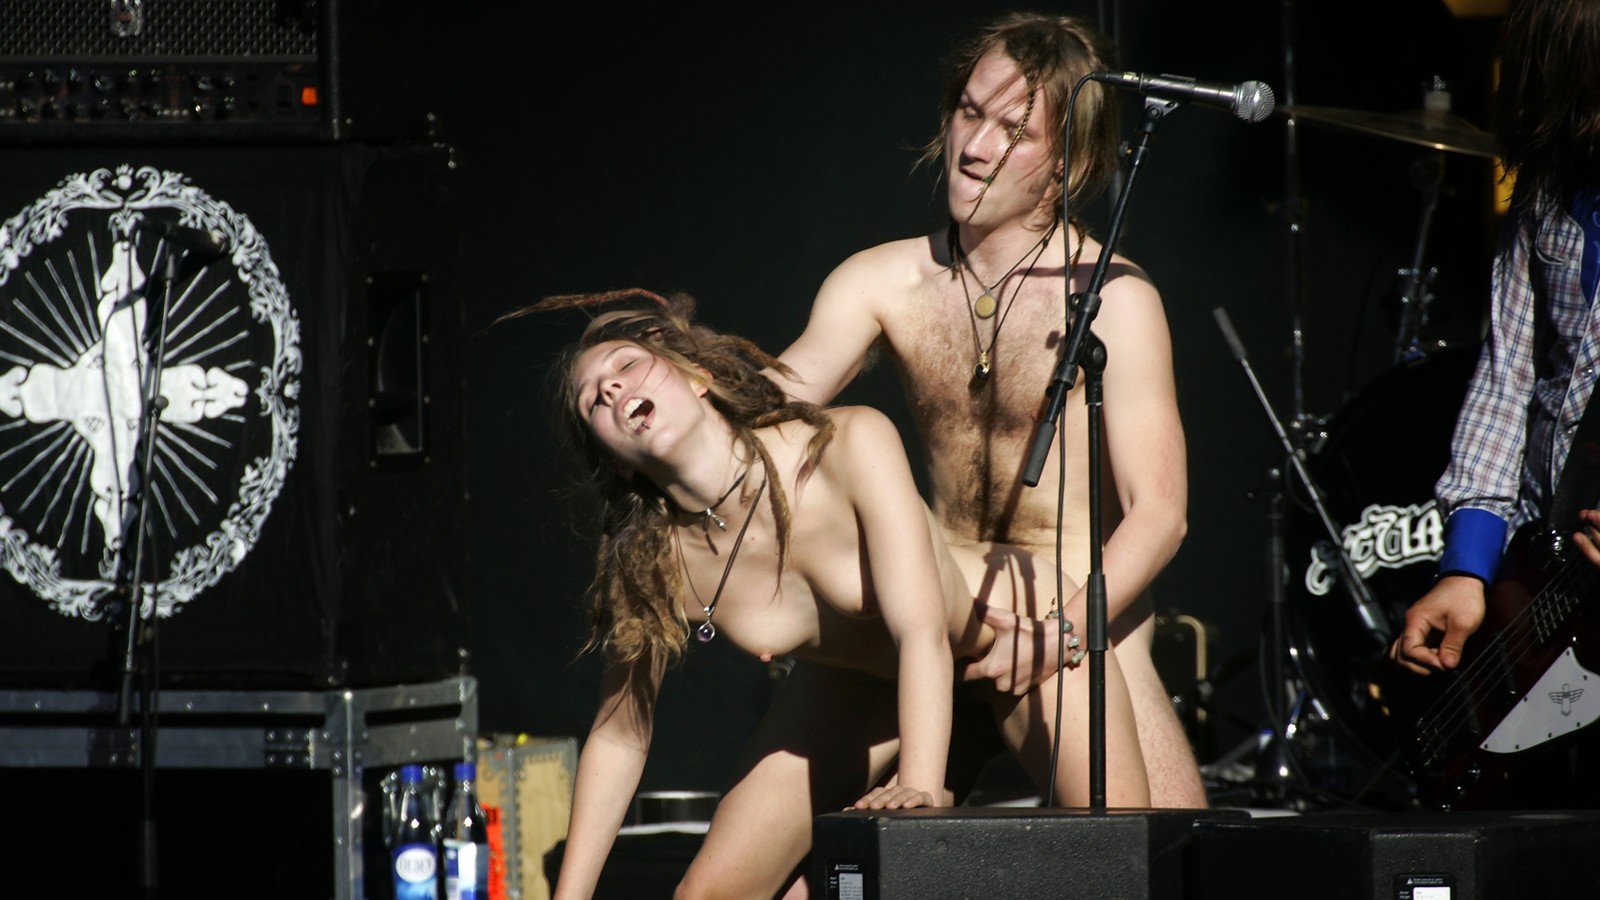 Nude Singer on Stage.